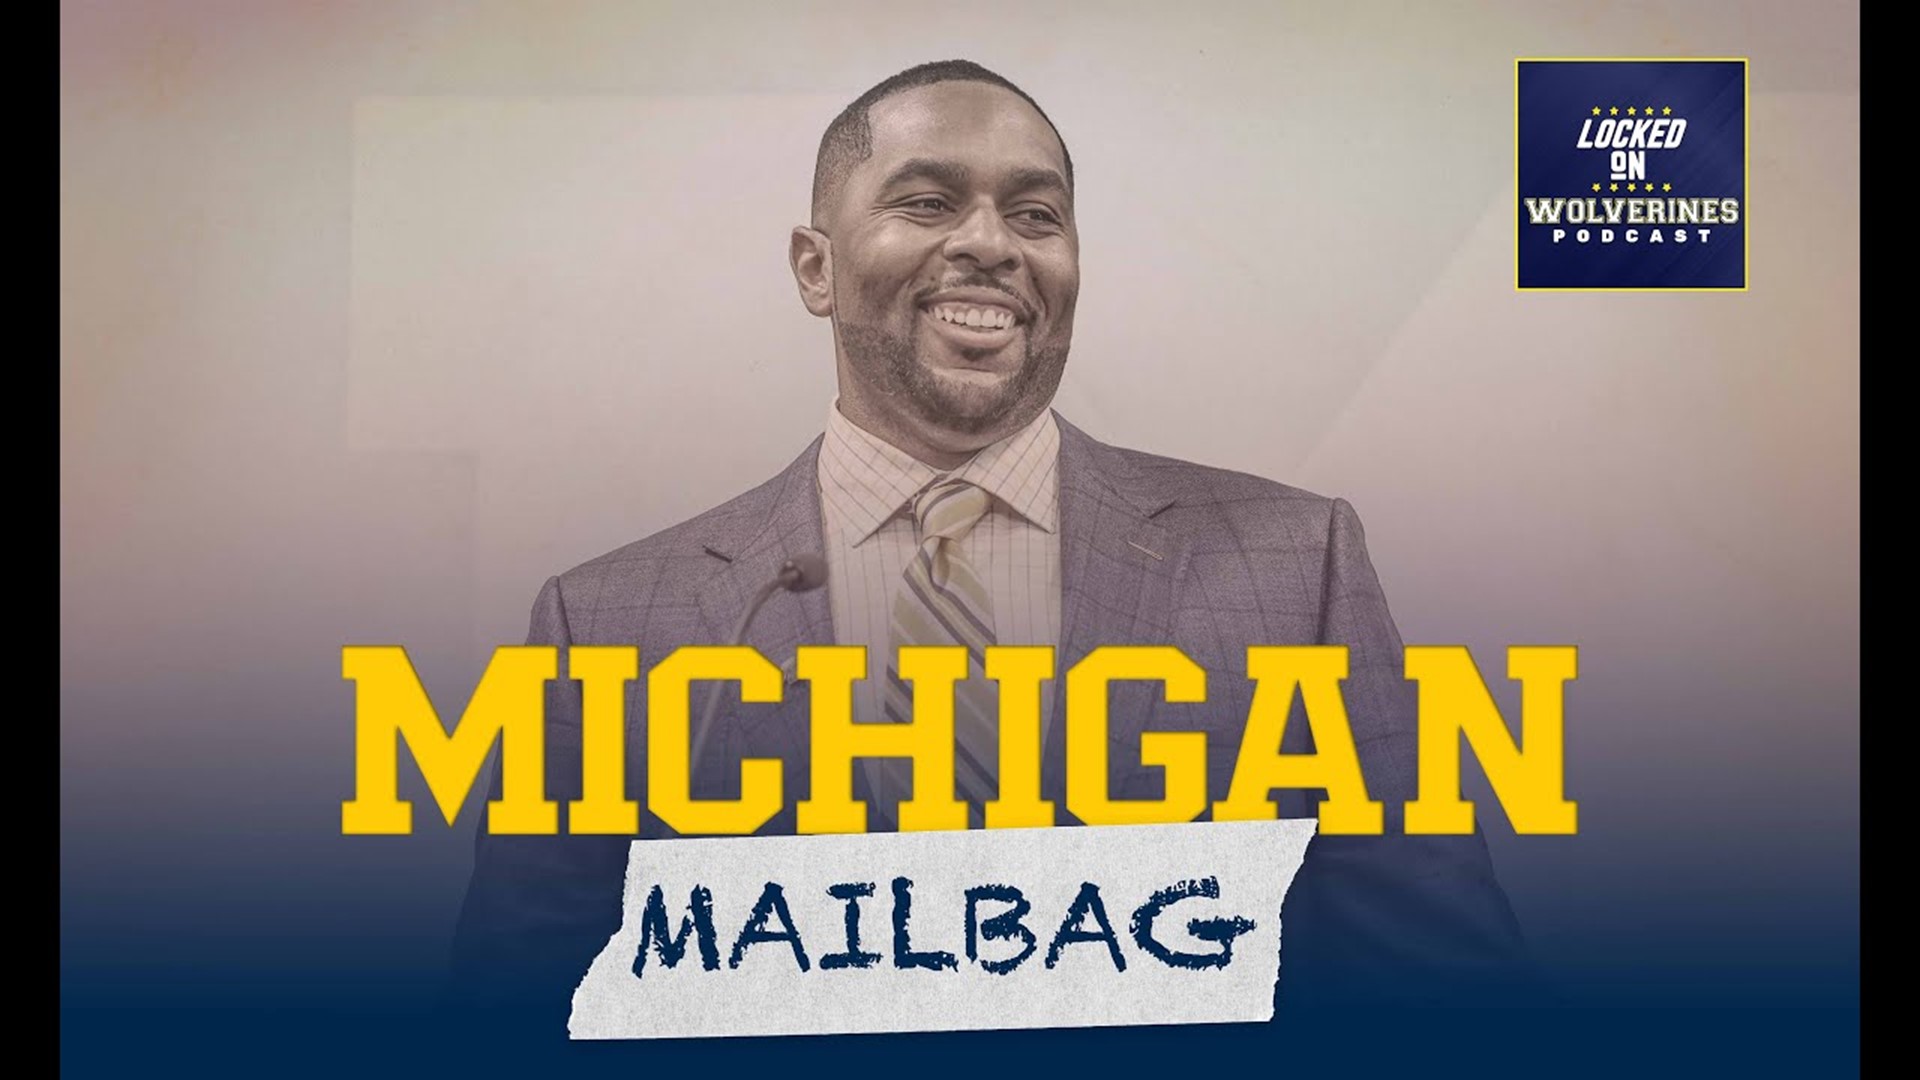 Michigan Mailbag is excited about the new staff